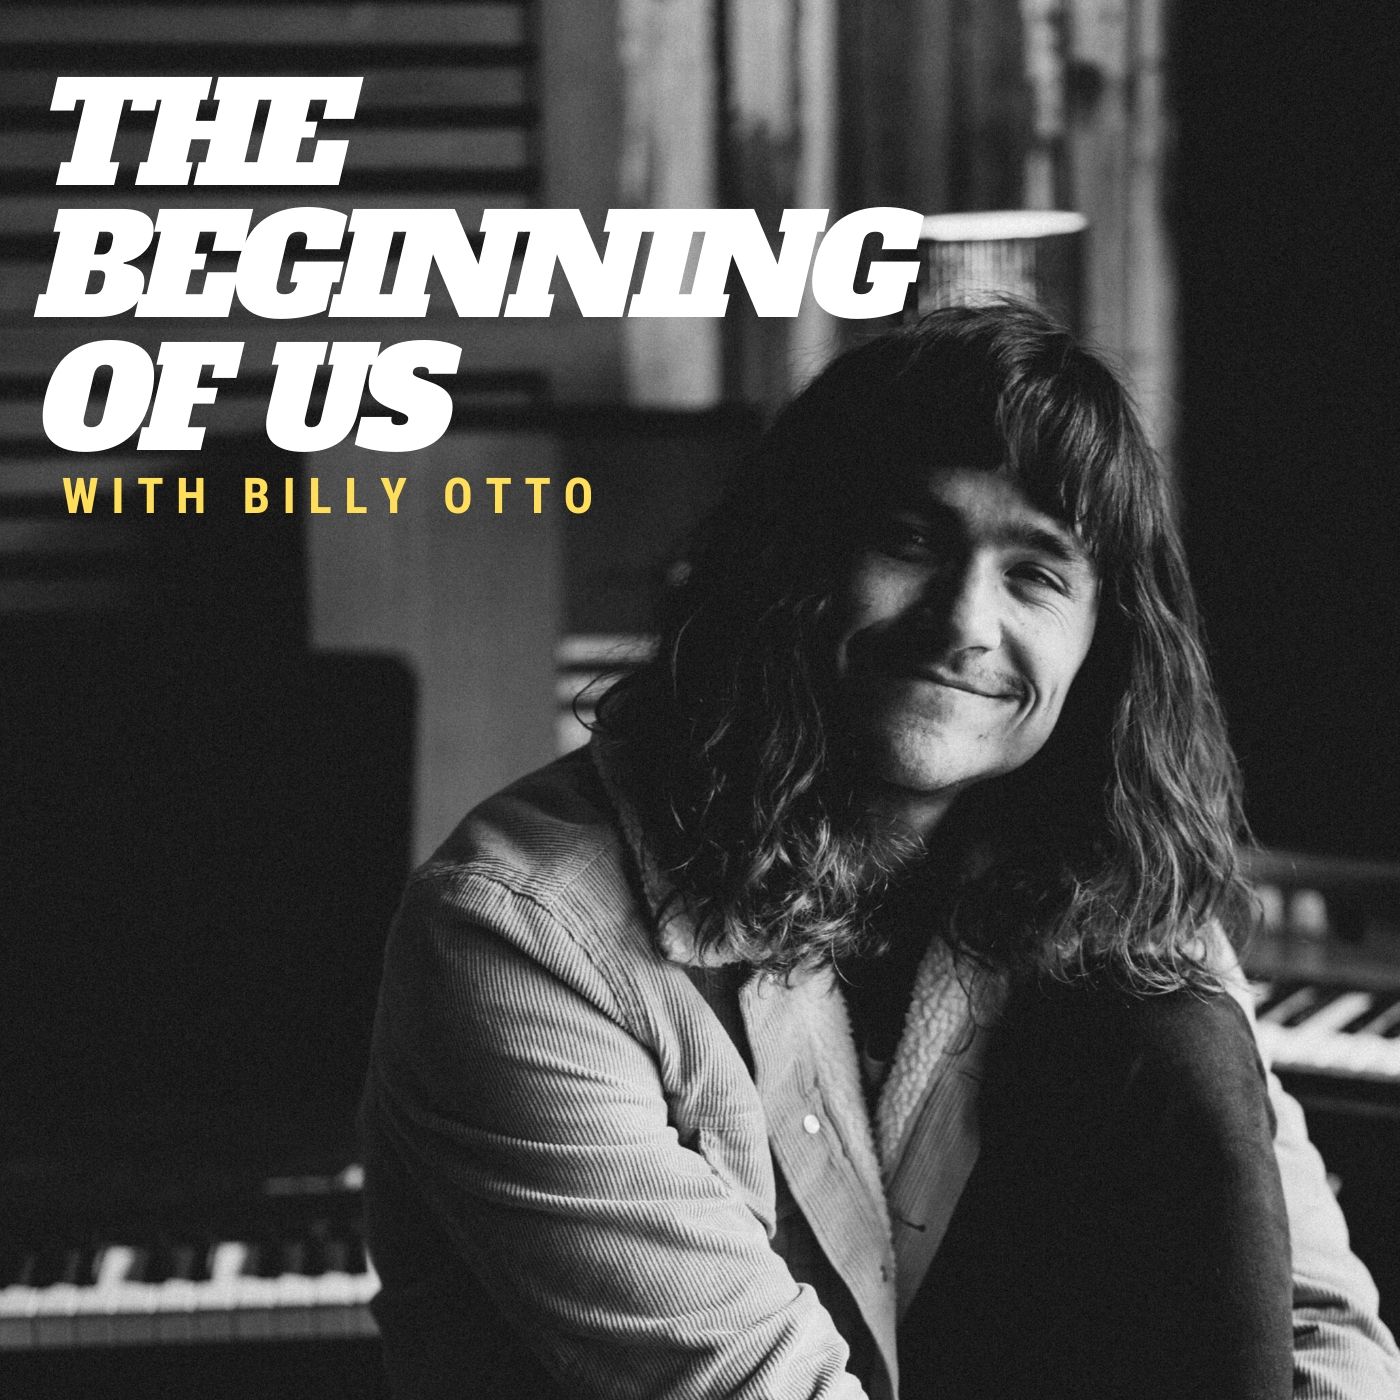 THE BEGINNING OF US with BILLY OTTO